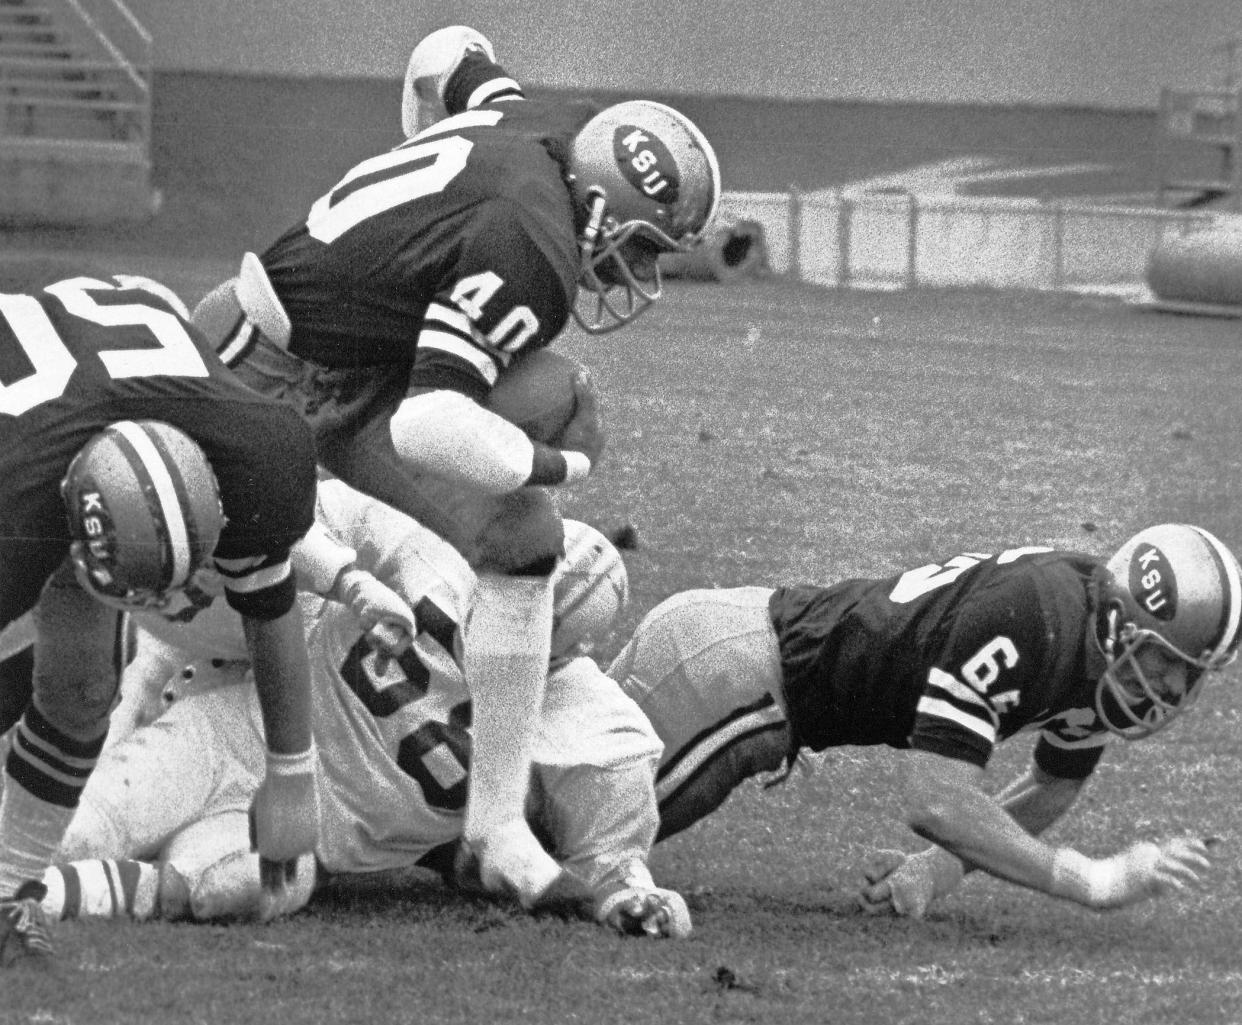 Larry Poole runs the football for Kent State in an undated photo.